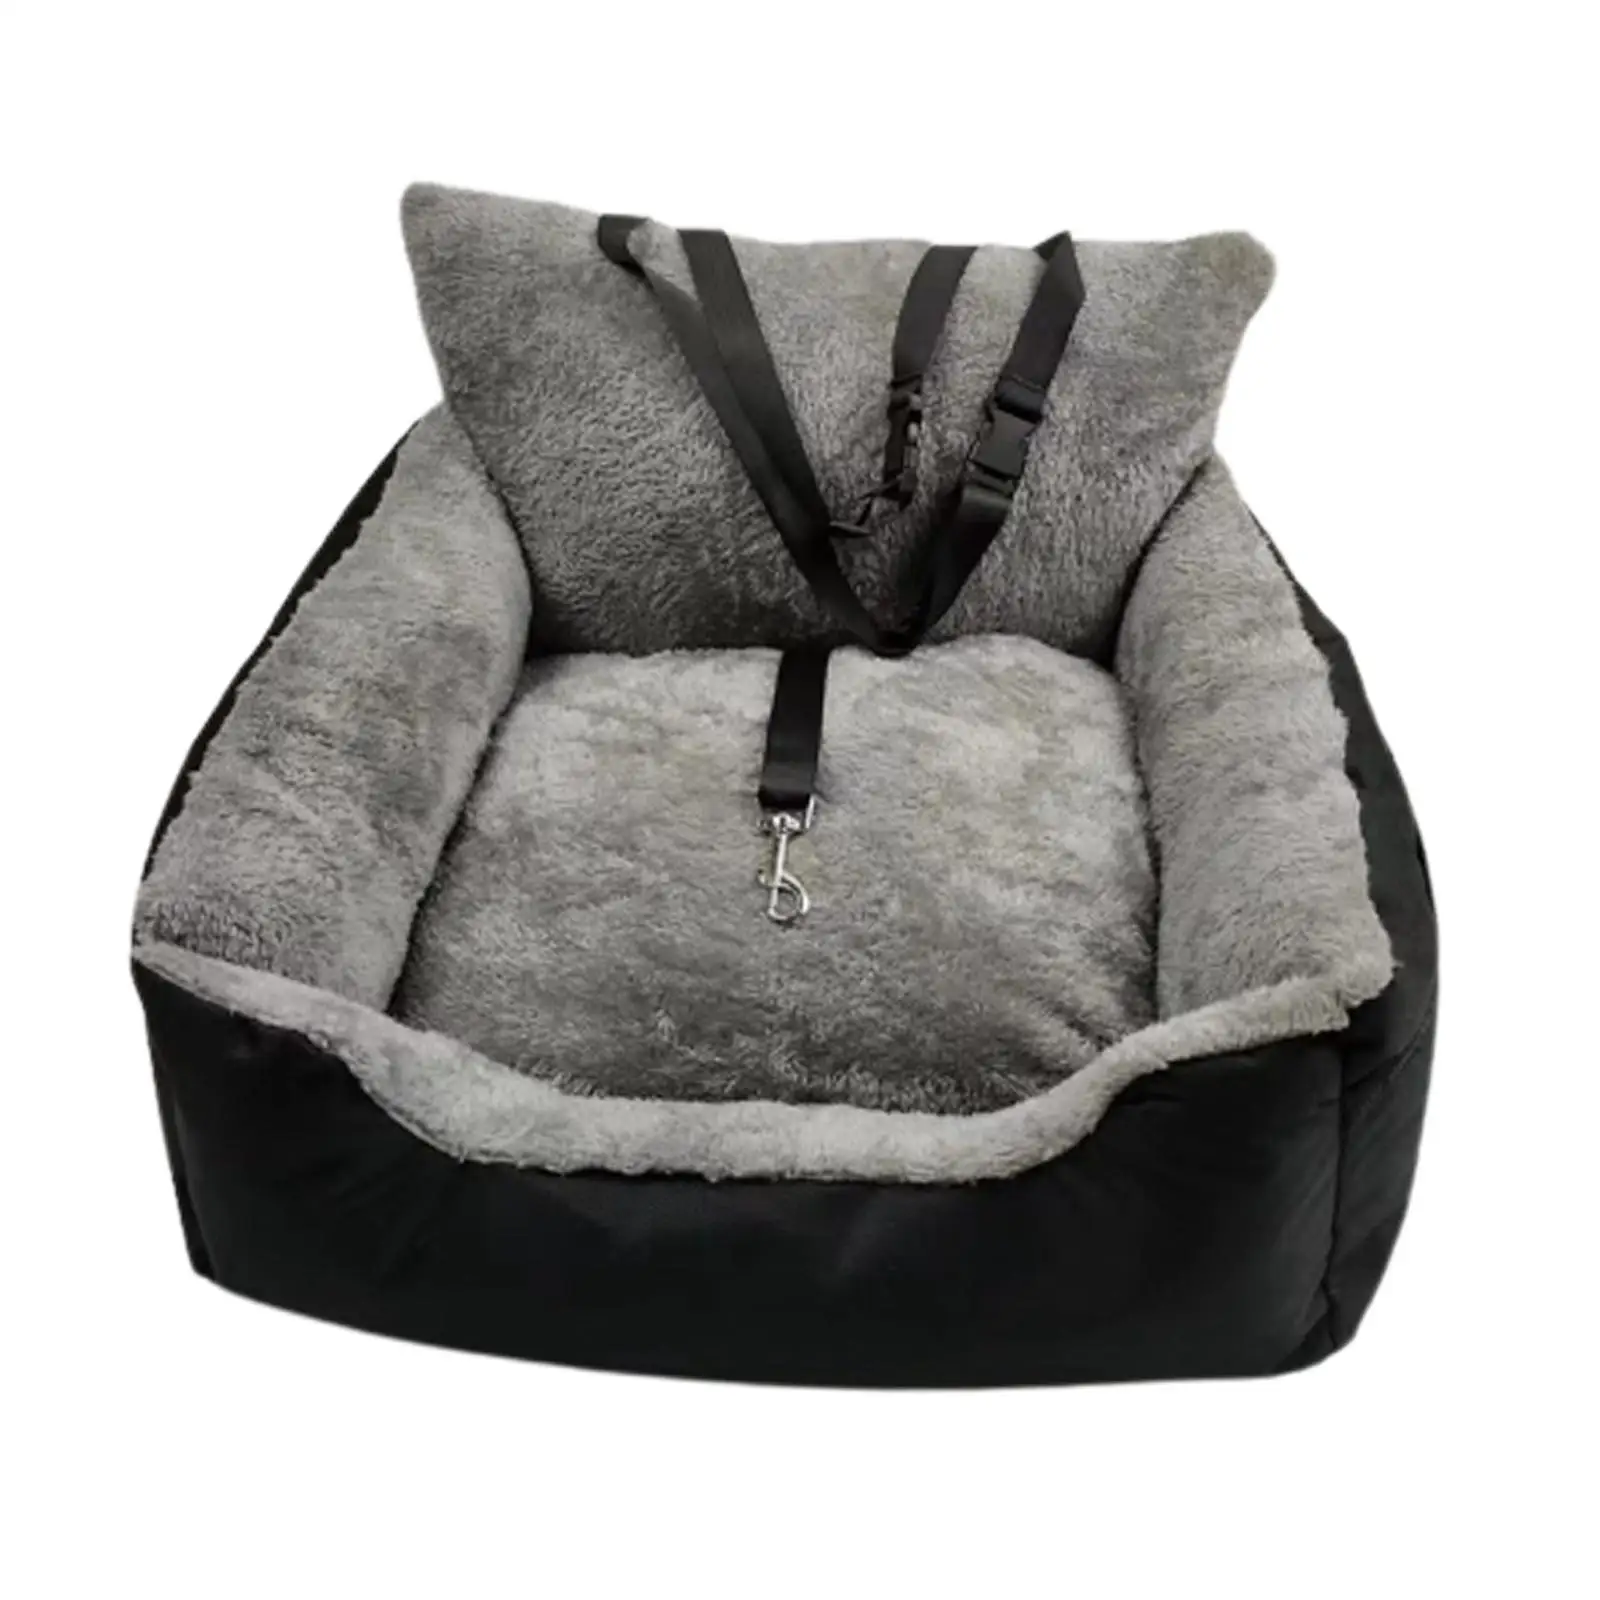 Dog Car Seat Booster Seat Nest with Removable Cushion Car Travel Bed Dog Car Travel Carrier Bed for Small Medium Dogs Kitten